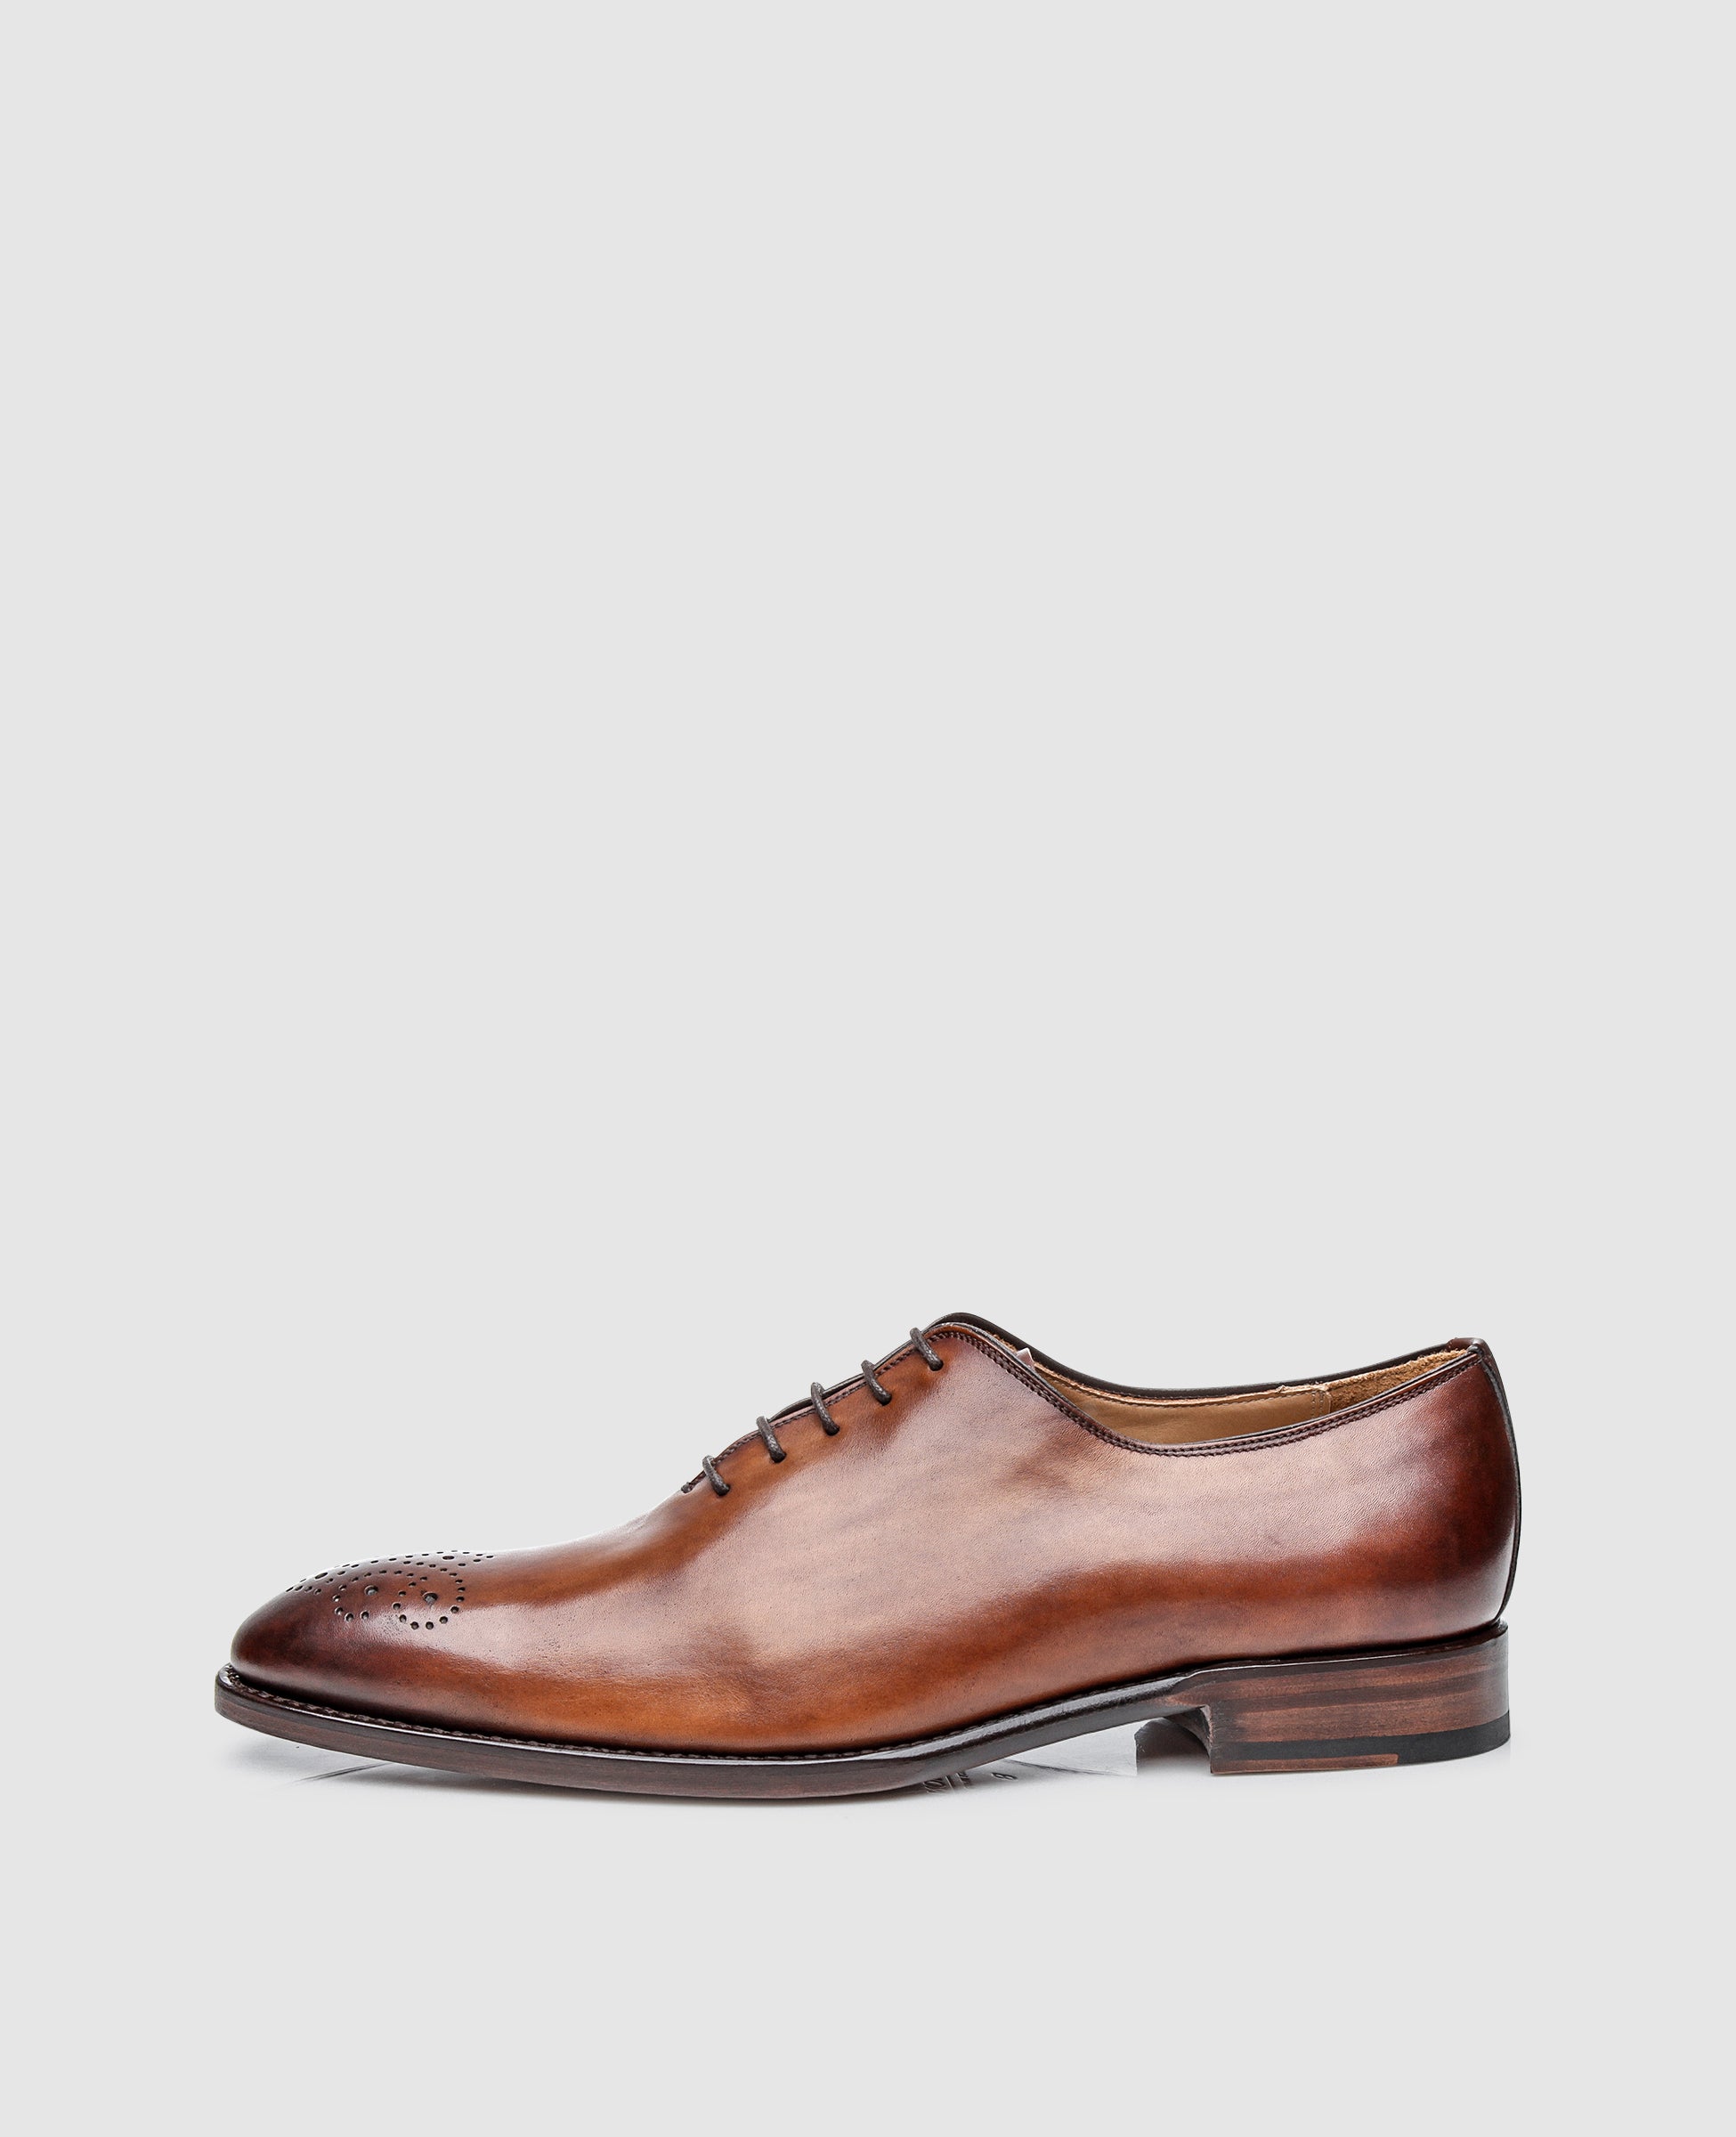 SHOEPASSION.com – Goodyear-welted Wholecut with decoration | Shoepassion